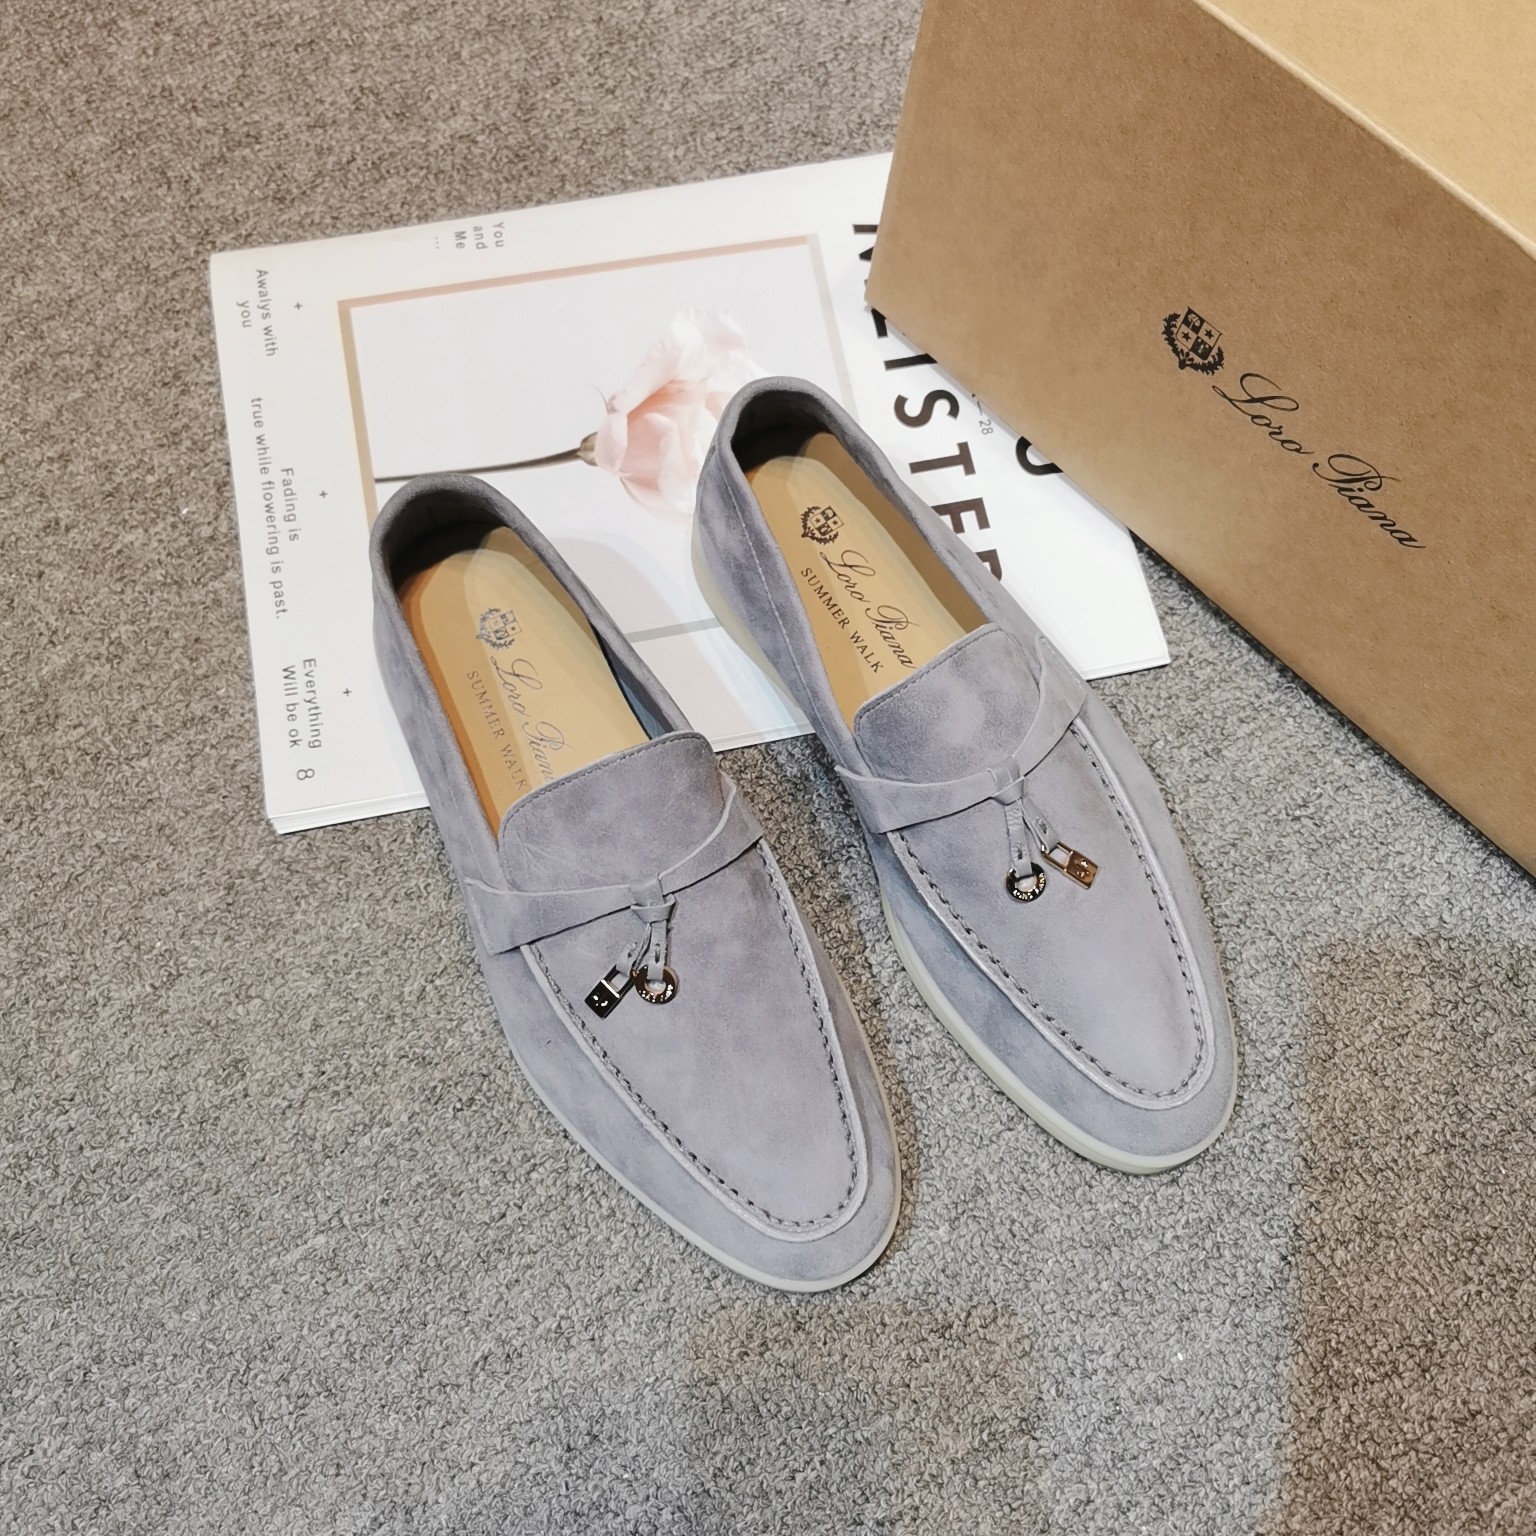 LP Loafers Spring High Quality Autumn 2021 Flat Leather Women Casual Shoes Soft Soled size34-42